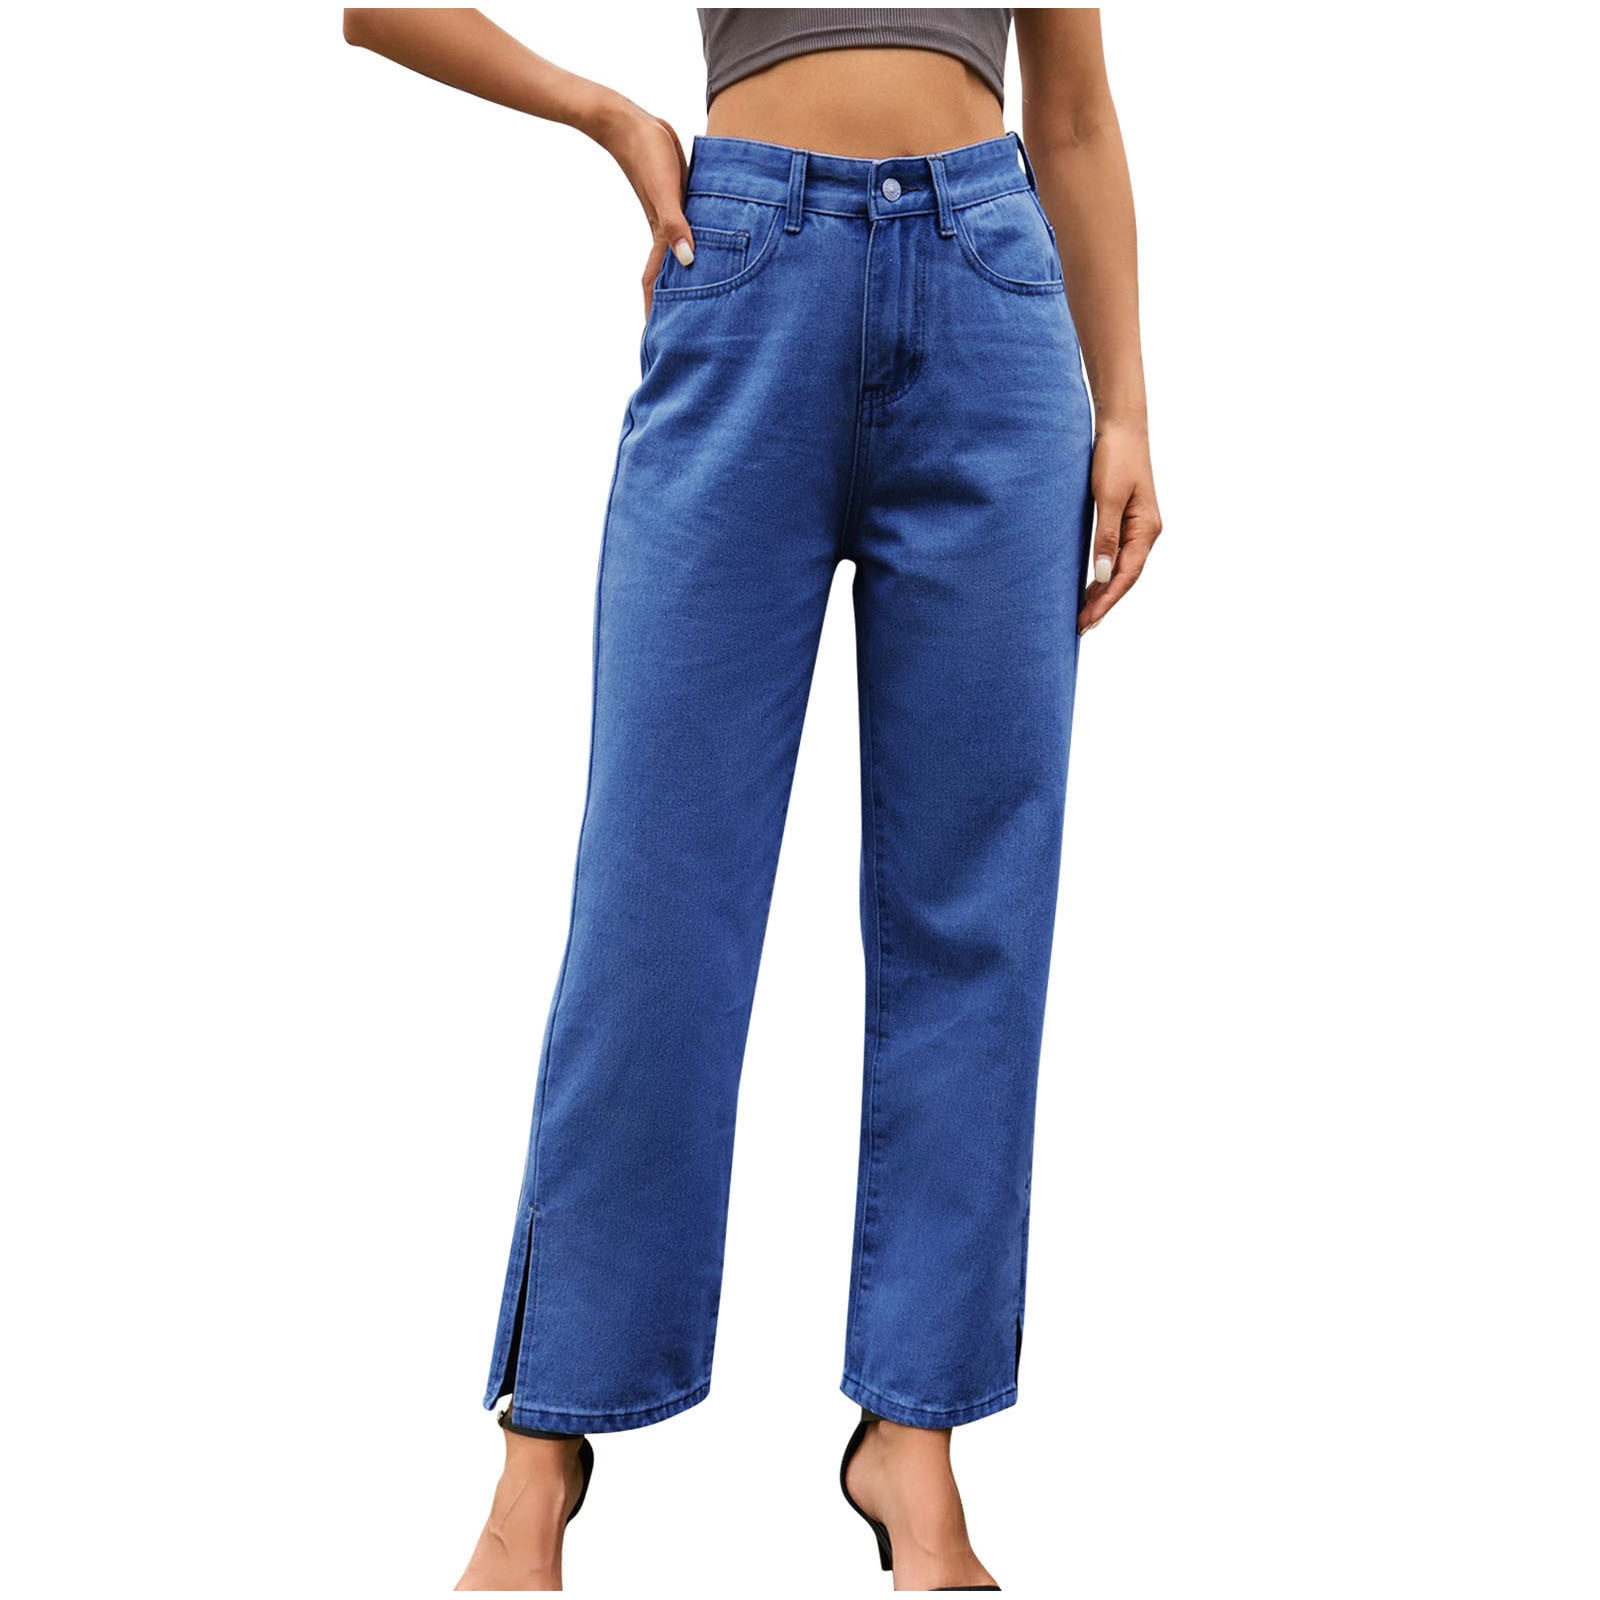 Pants And Light Summer Jeans Pocket Jeans Solid qILAKOG High Boyfriend Denim Casual Casual with Women\'s Fashion Blue Button S Women\'s Pants Spring Rise New Split